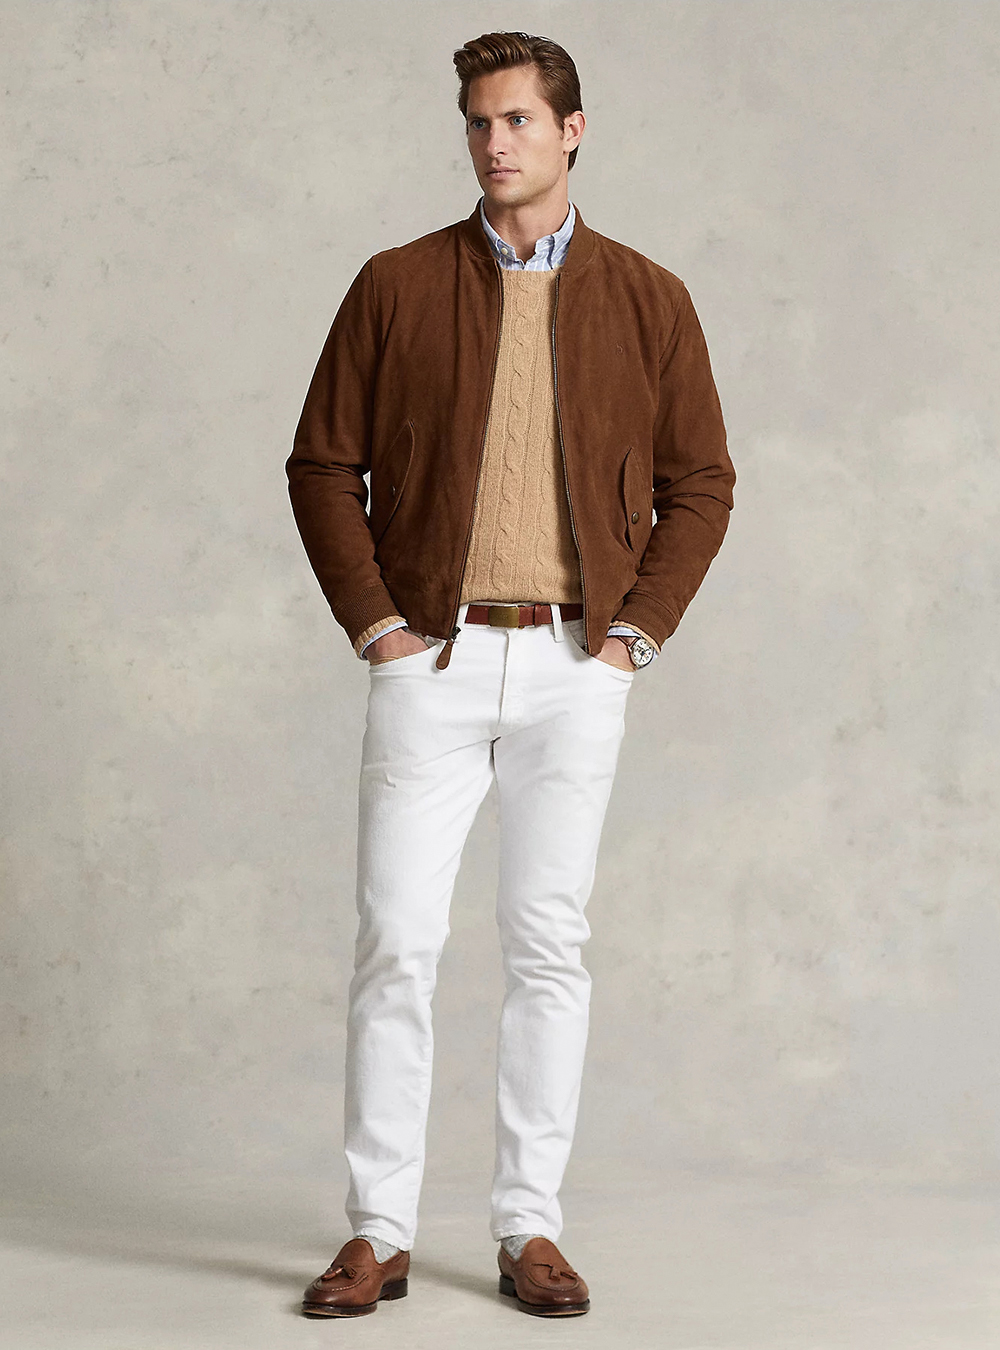 Brown suede bomber jacket, blue striped shirt, tan cardigan, white jeans, and brown loafers